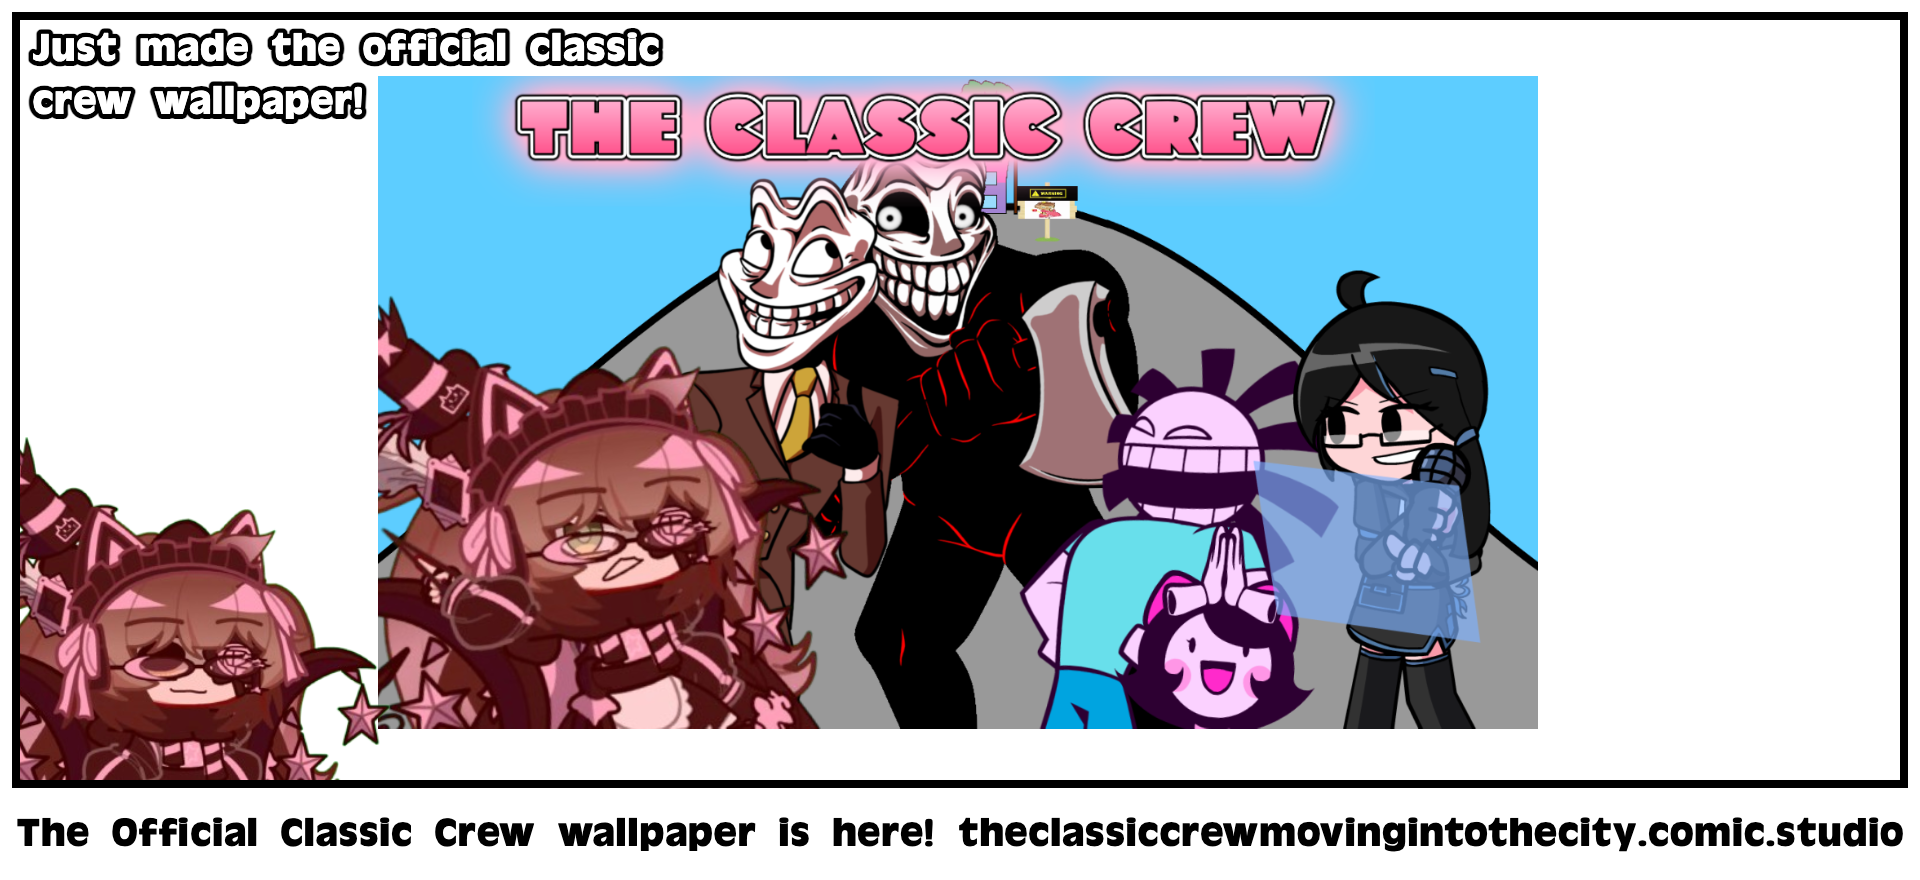 The Official Classic Crew wallpaper is here!